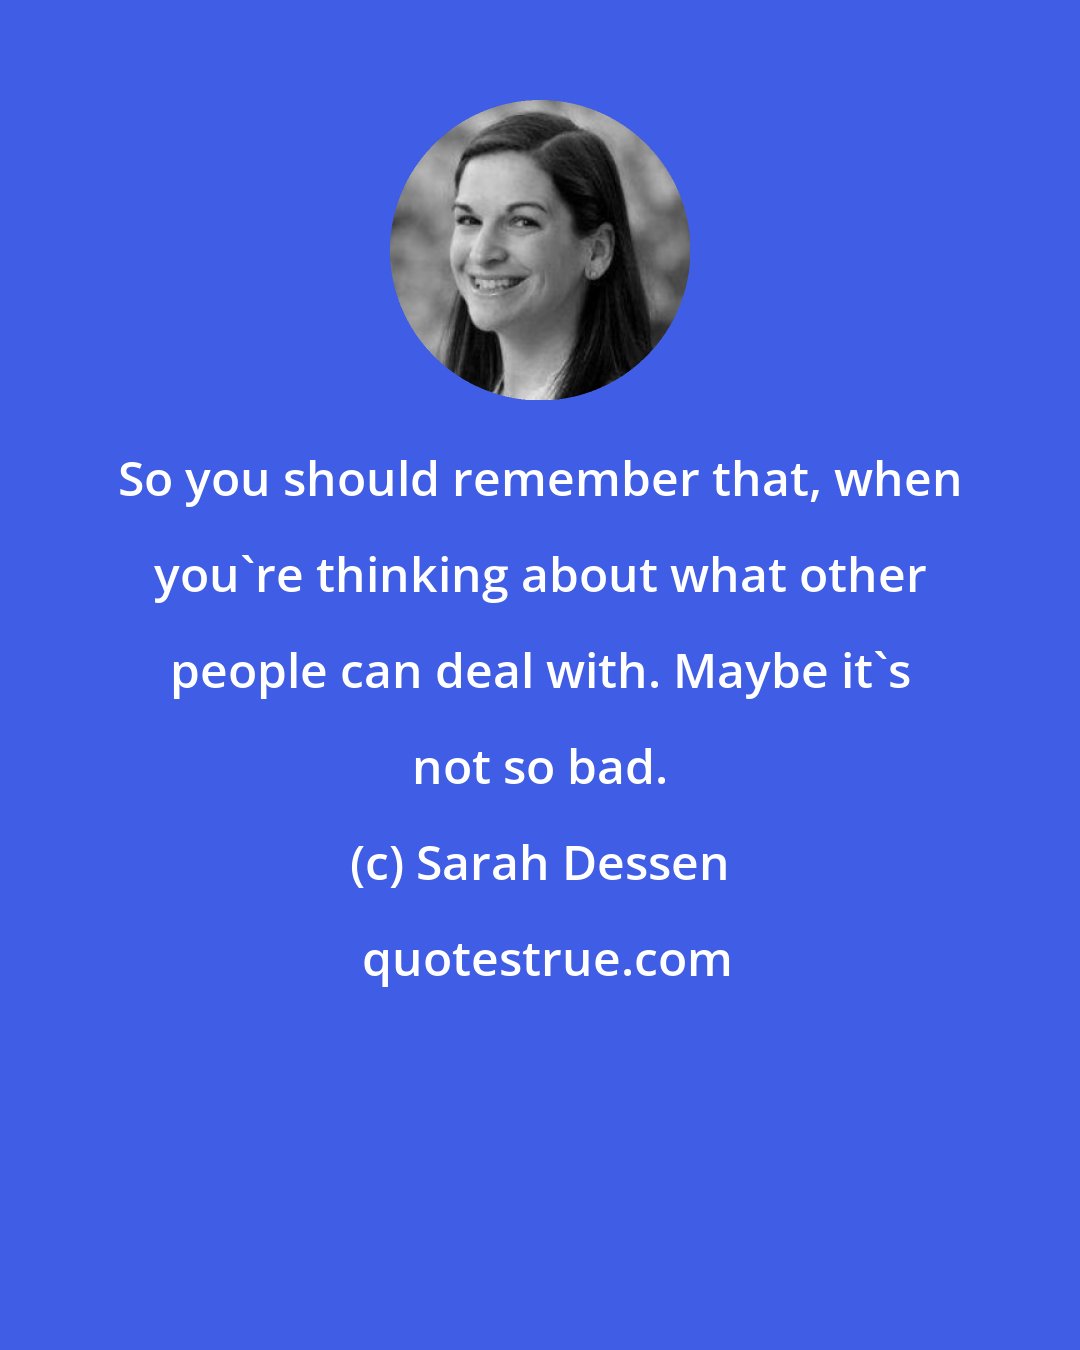 Sarah Dessen: So you should remember that, when you're thinking about what other people can deal with. Maybe it's not so bad.